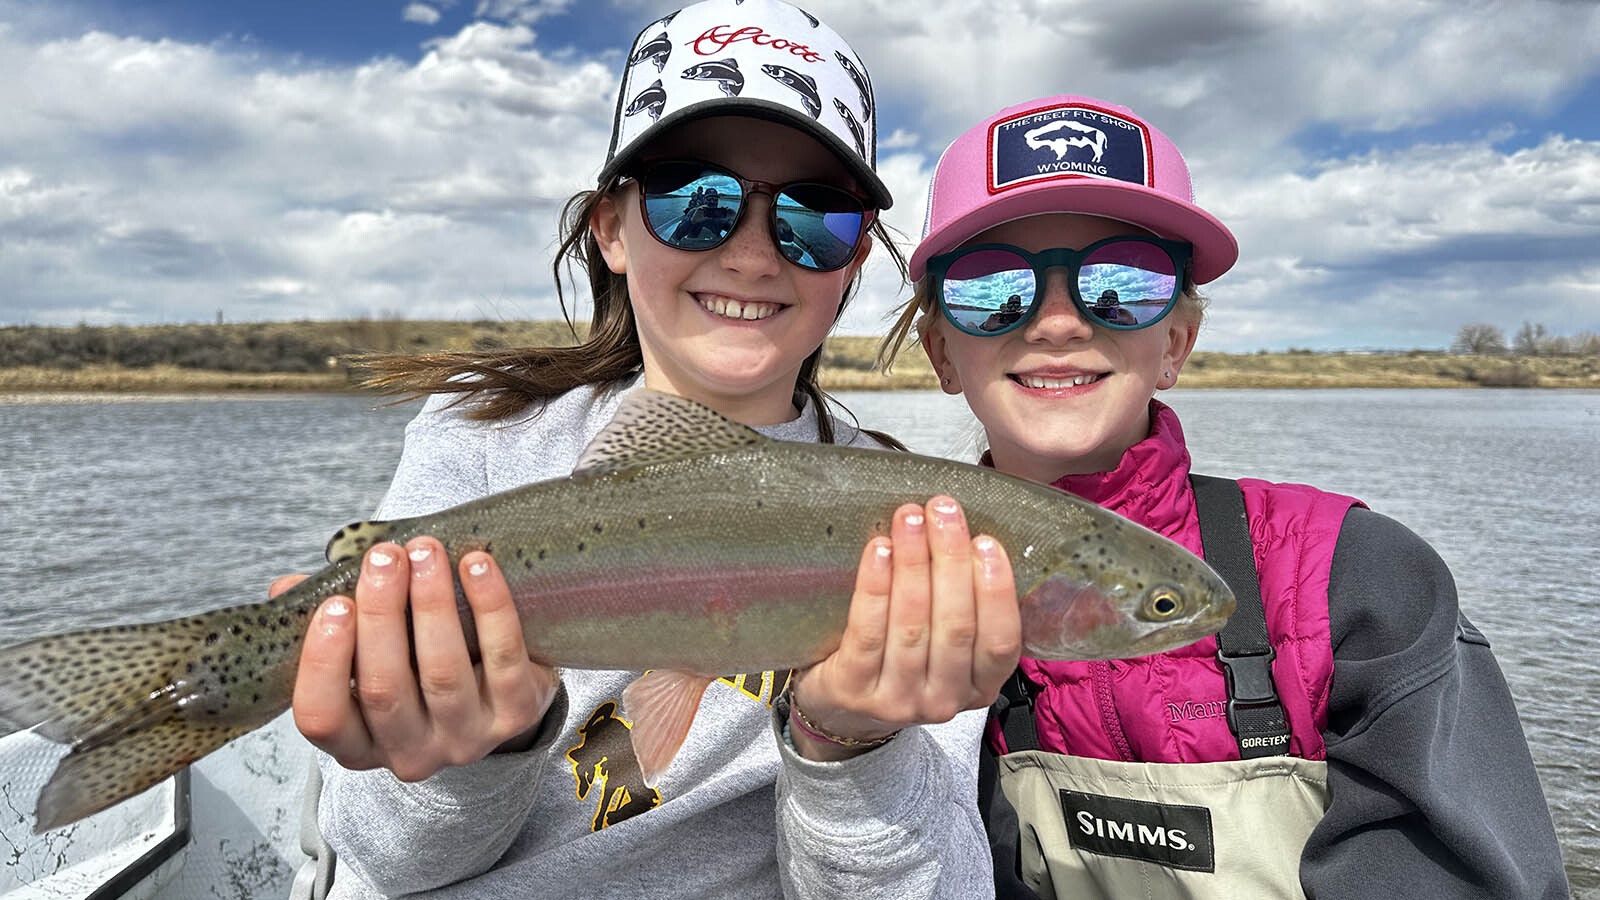 The Grey Reef area of the North Platte River gives anglers an opportunity to catch some prized trout due to its “food factory” of insects and various fly hatches.